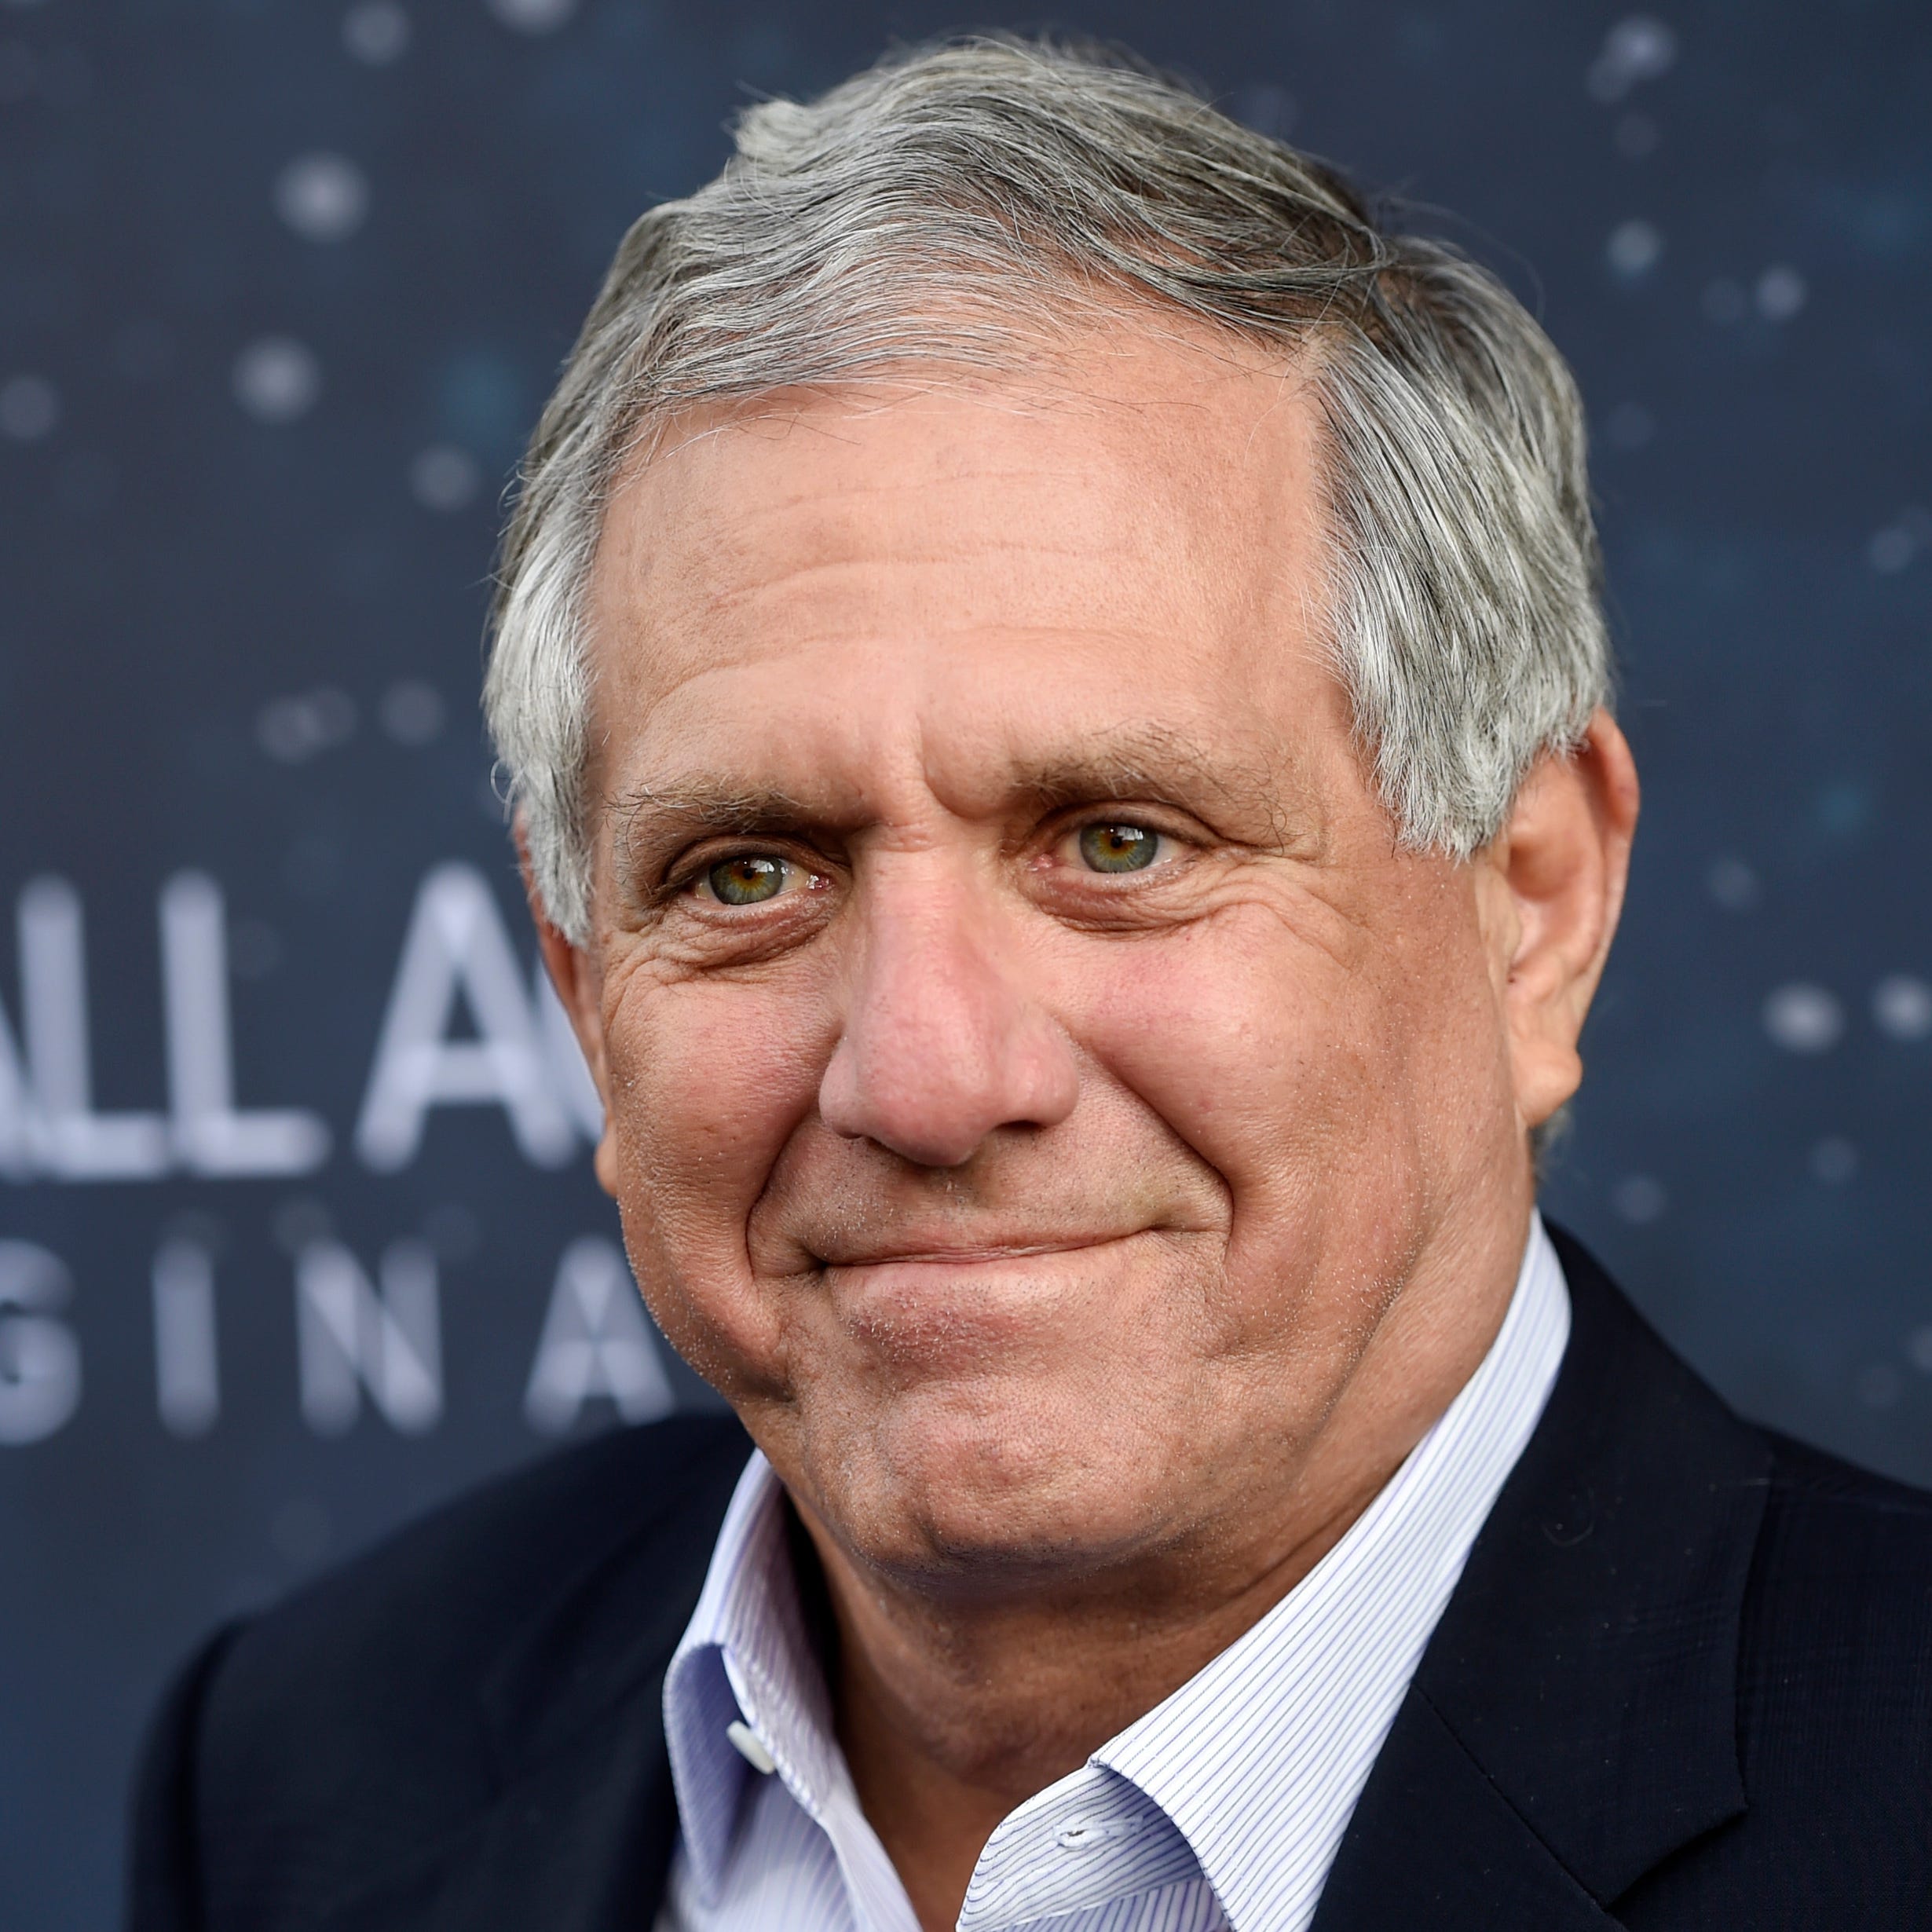 CBS CEO Les Moonves stands accused of sexual harassment by six women.